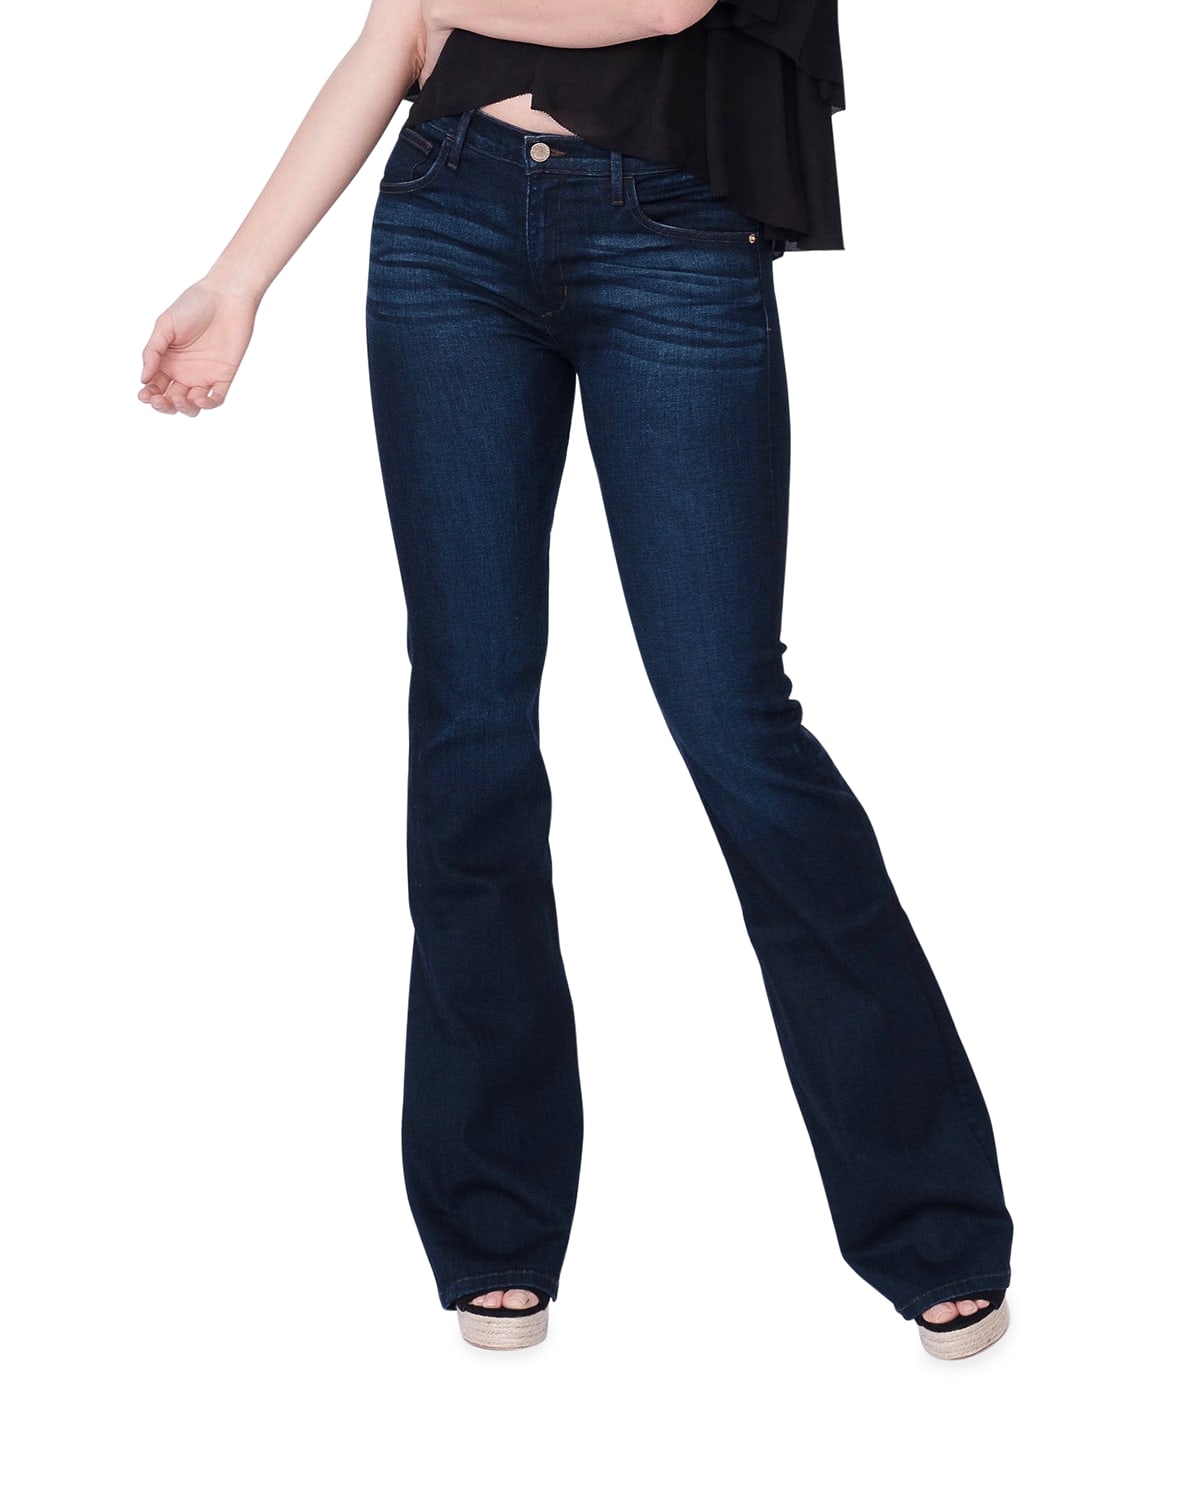 Oops Outlet Womens Designer Rip Regular Straight Fit Pockets Faded Bootcut Pants Denim Jeans